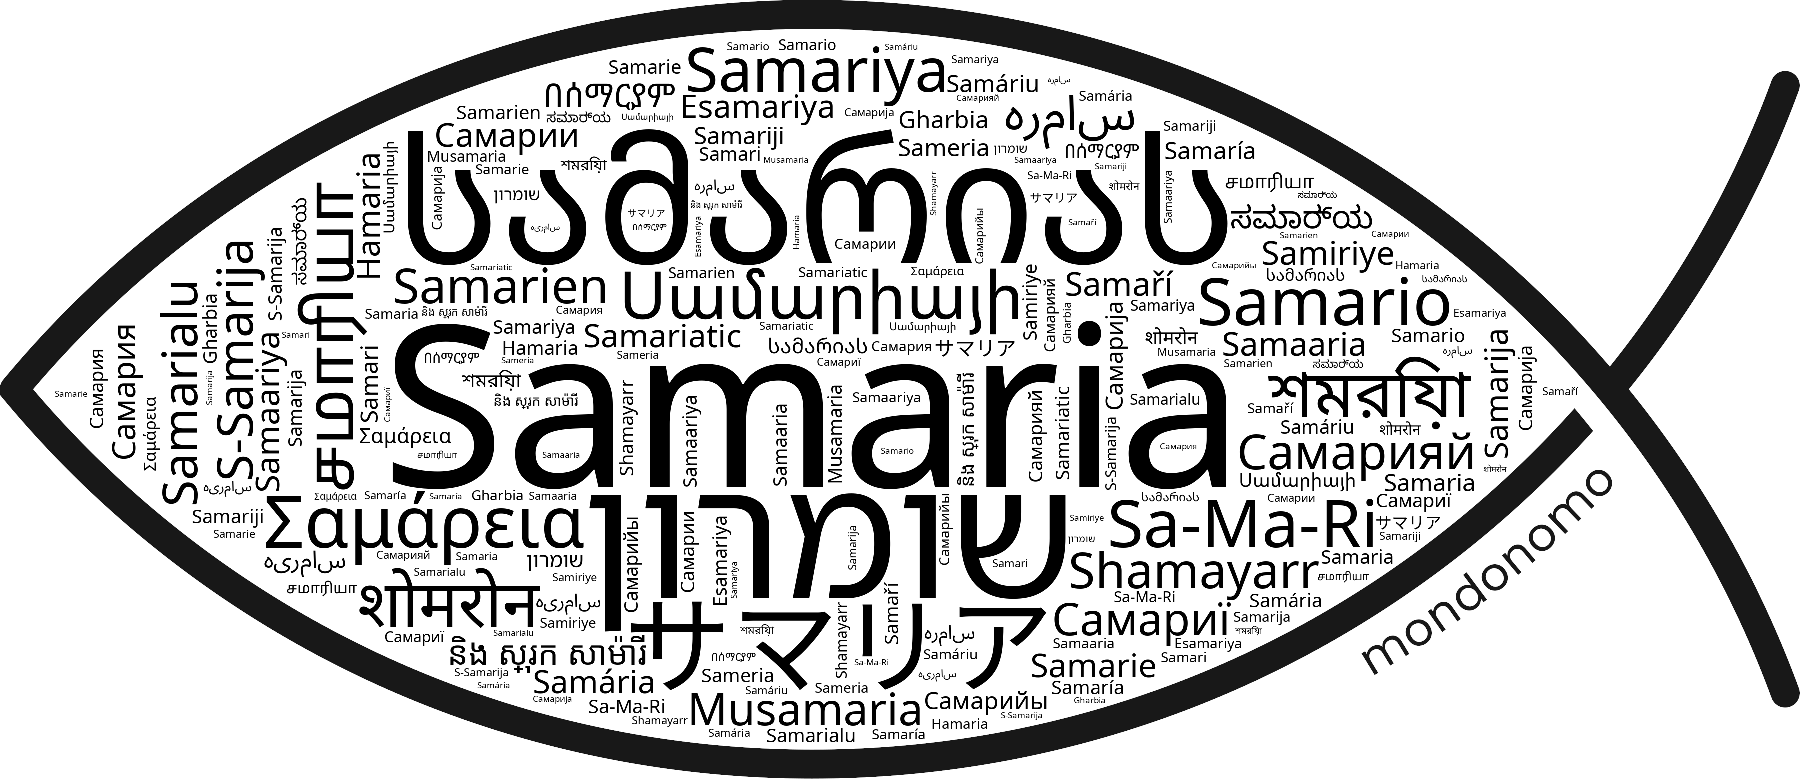 Name Samaria in the world's Bibles